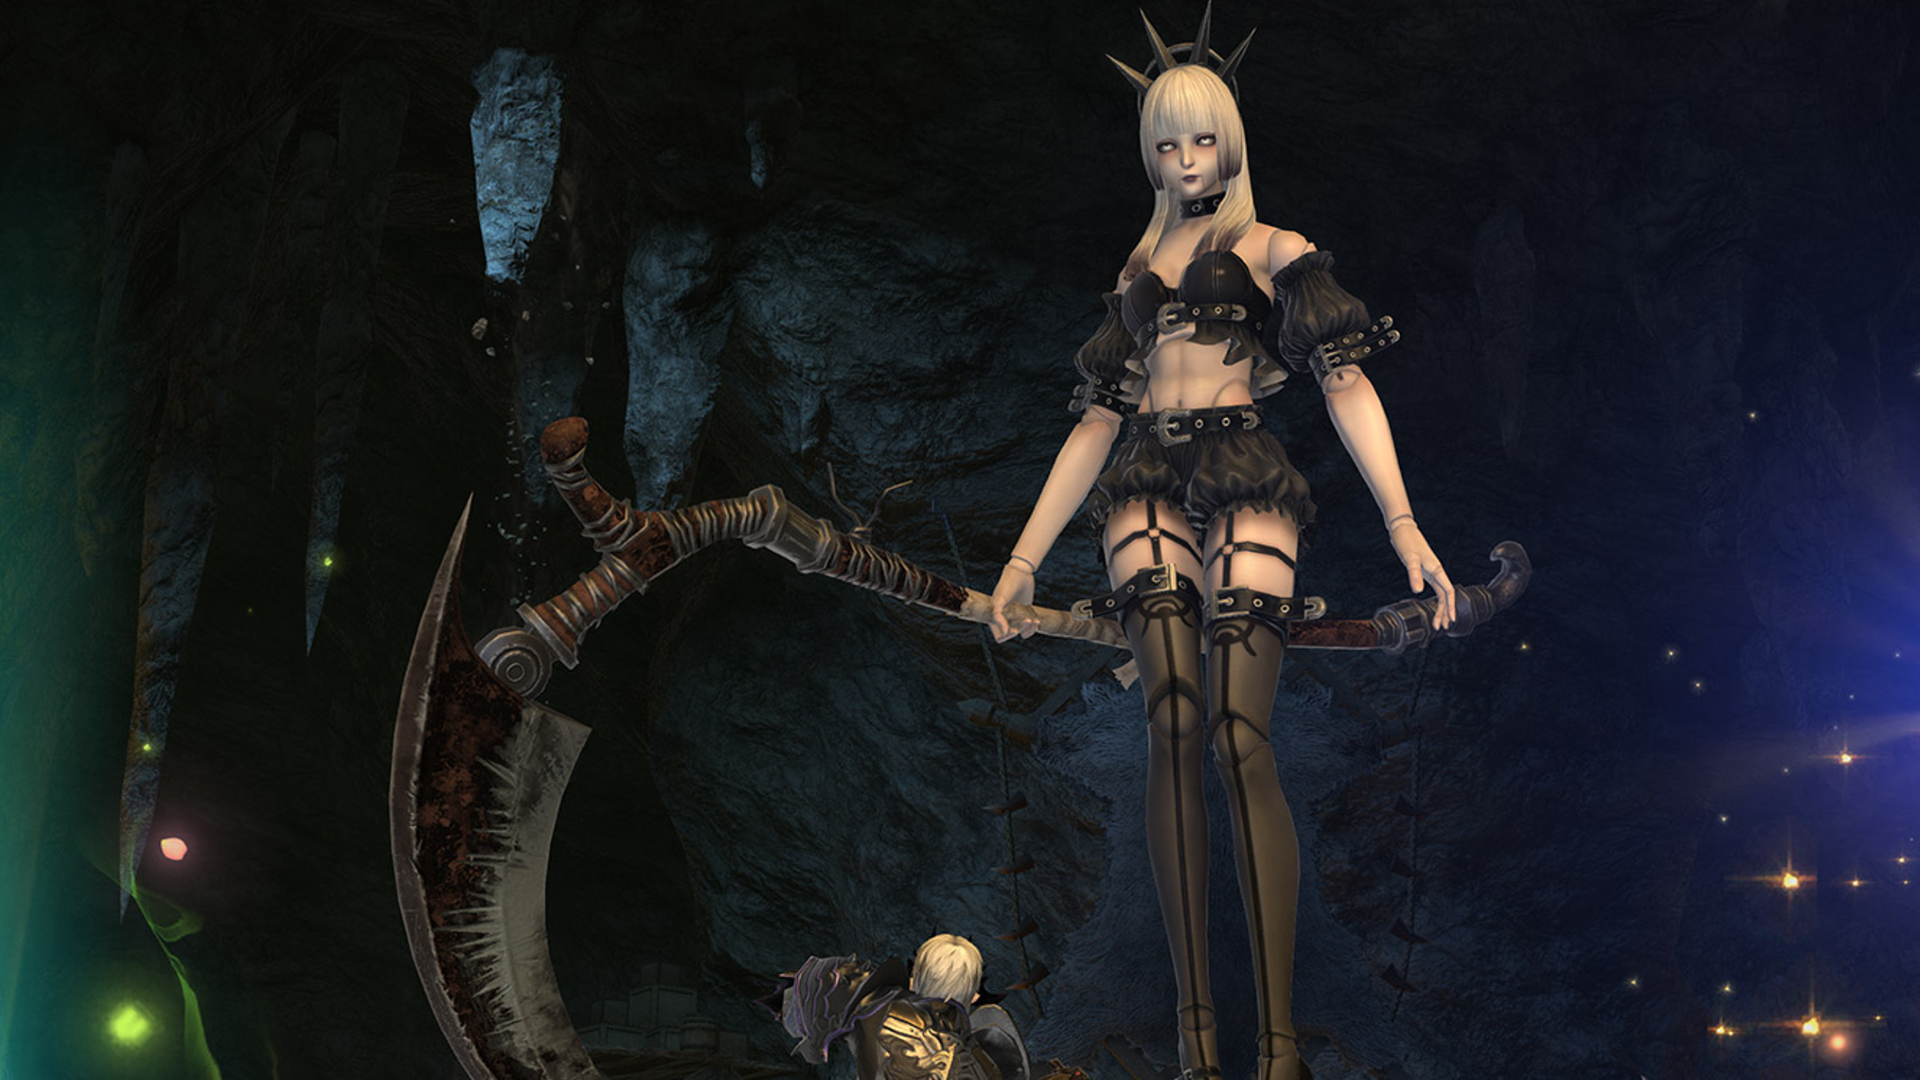  Final Fantasy 14 fans can't get over its new giant goth mommy dungeon boss 